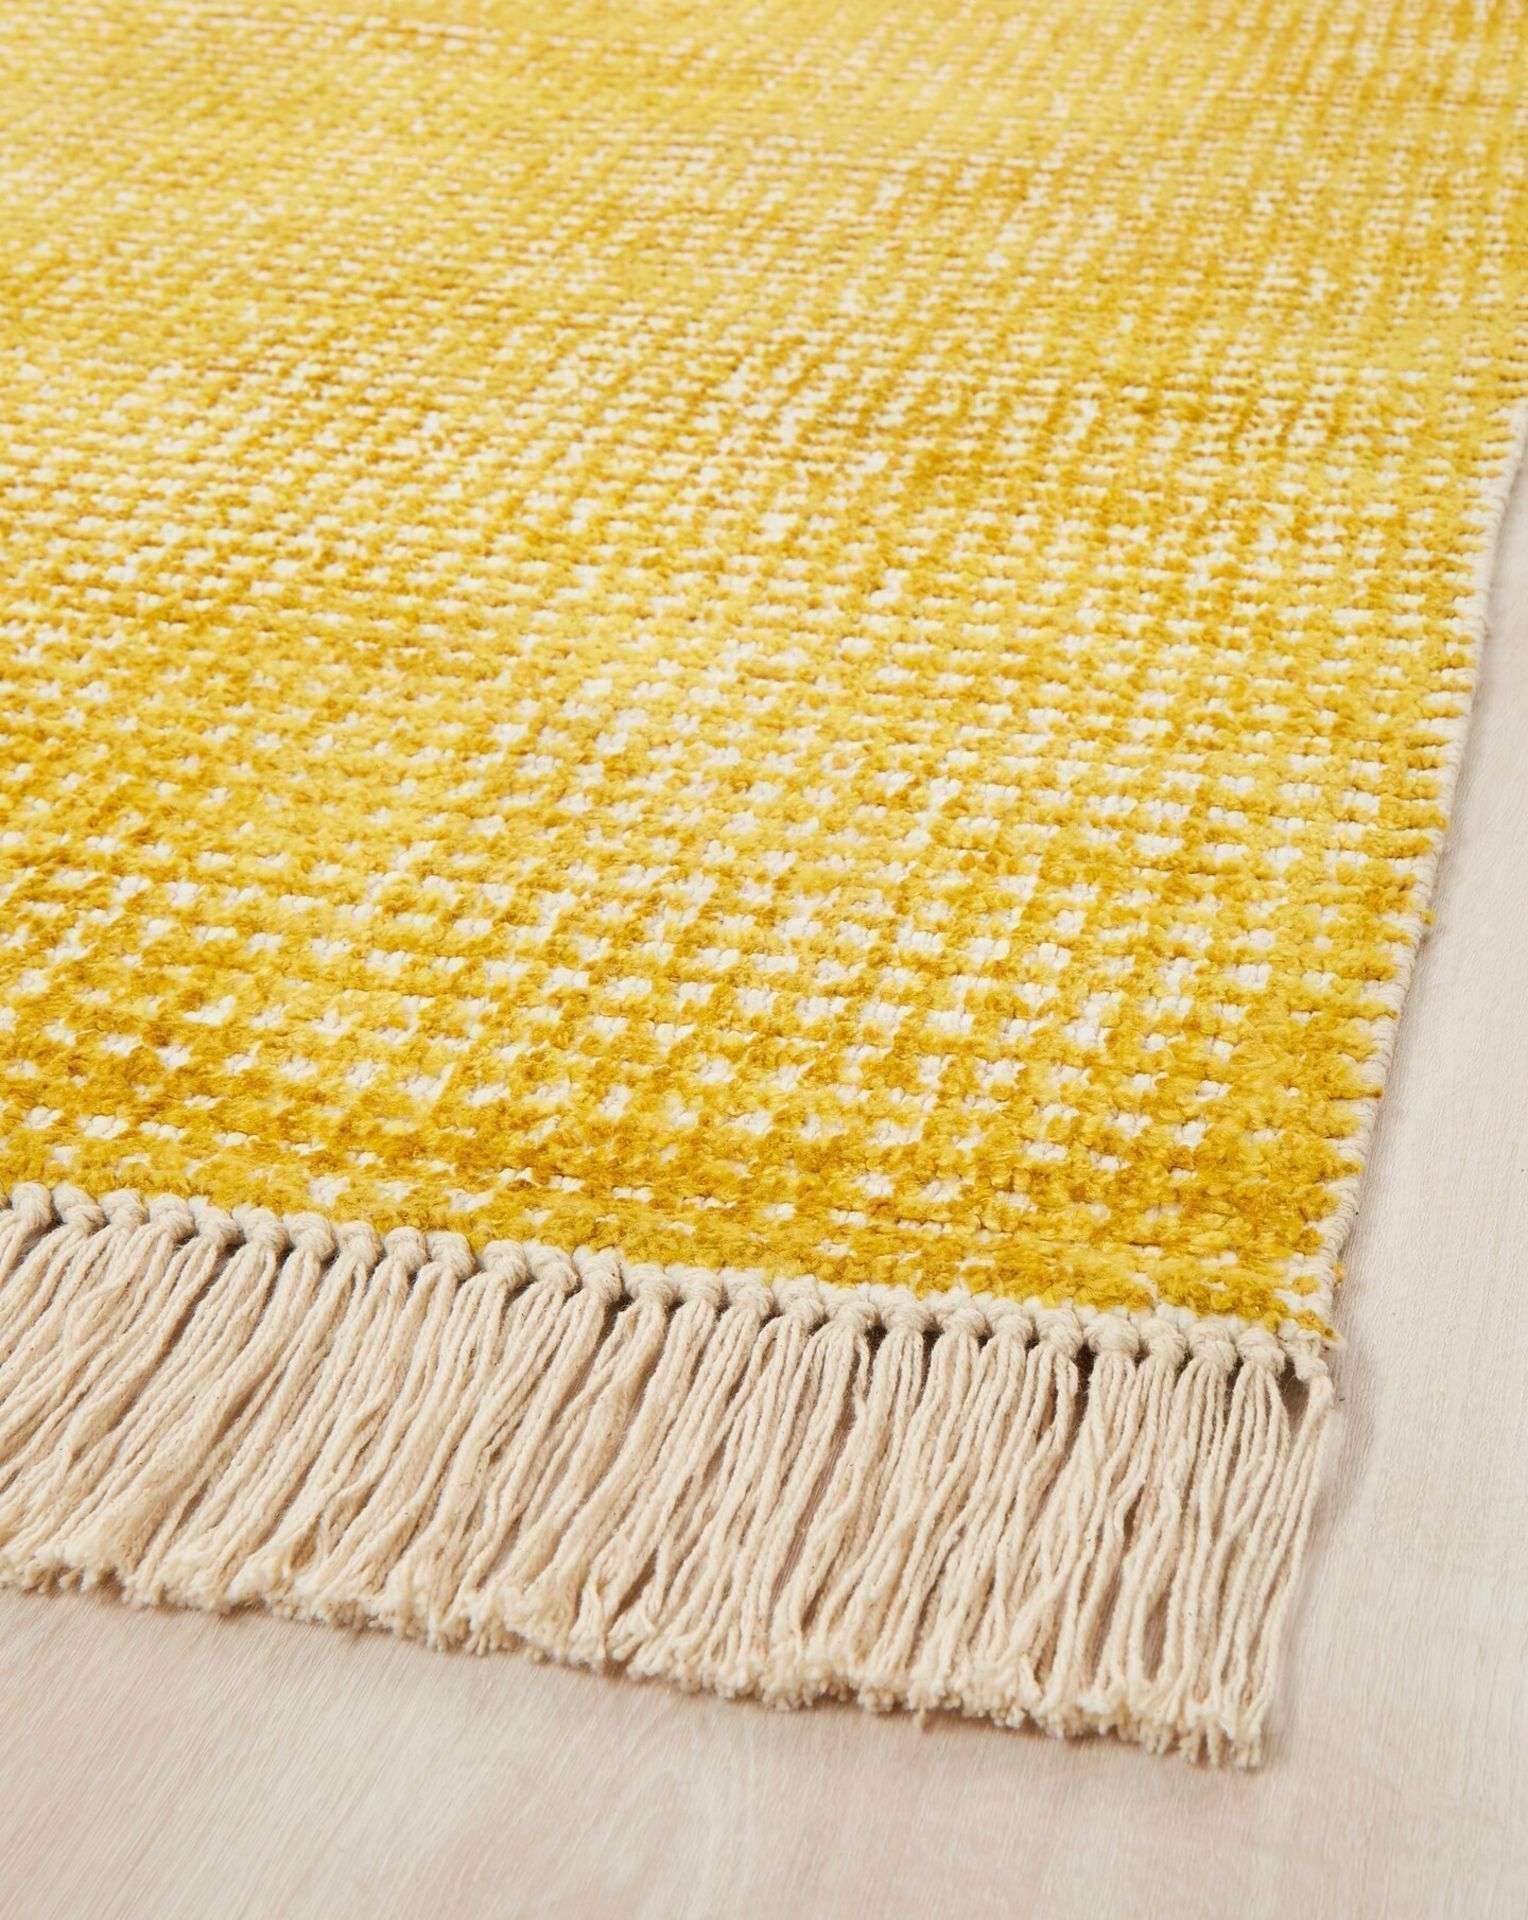 2x BRAND NEW Hallie Woven Fringe Rug 120CM X 170CM. NUGGET GOLD. RRP £89 EACH. A woven design that - Image 2 of 2